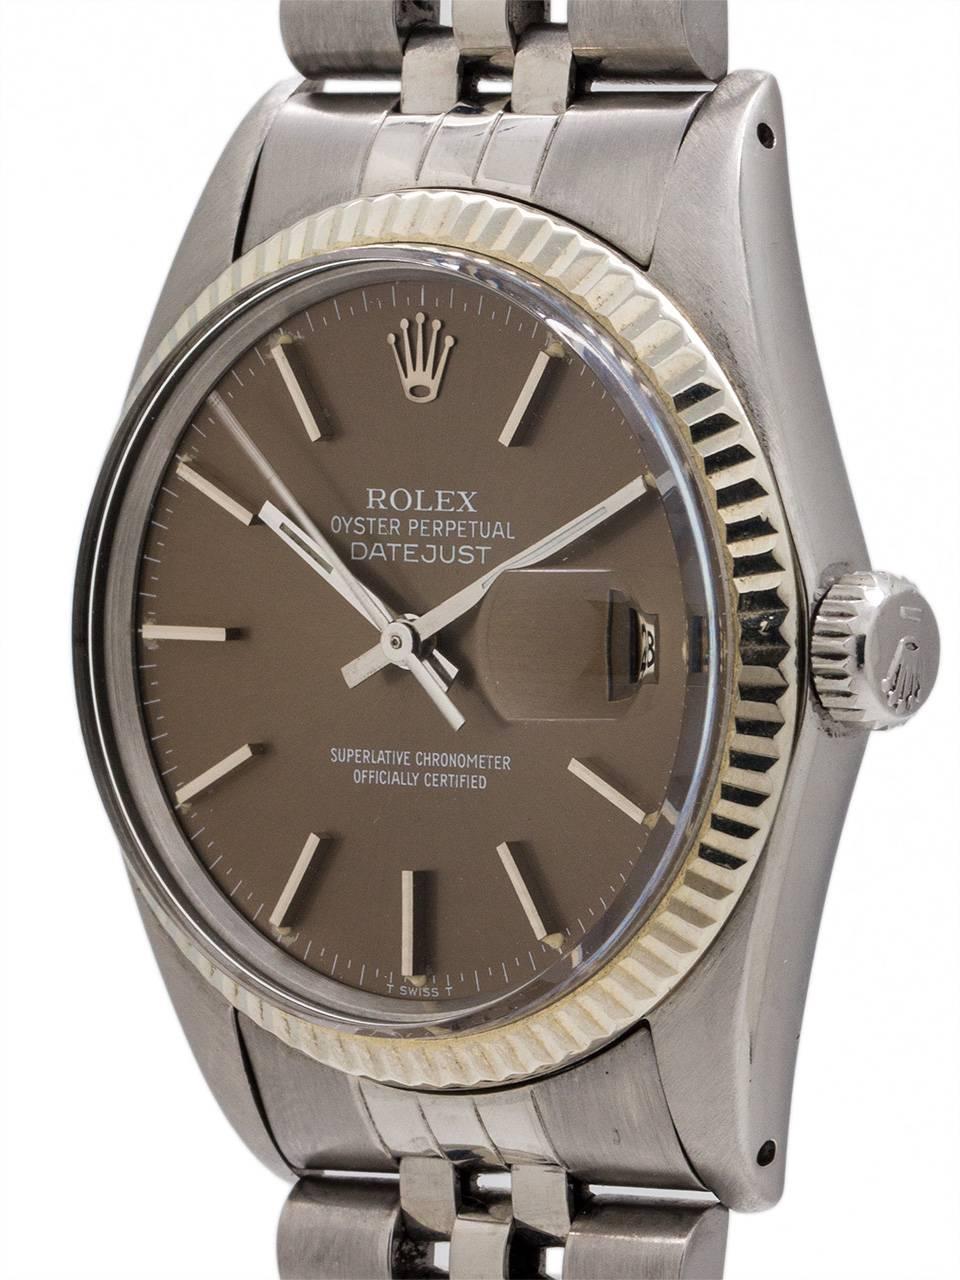  Rolex Stainless Steel Datejust ref #16014 serial #6.5 million circa 1980. 36mm diameter case with 18K white gold fluted bezel and acrylic crystal. Featuring an original gray taupe dial with applied silver  indexes and silver baton hands. Powered by